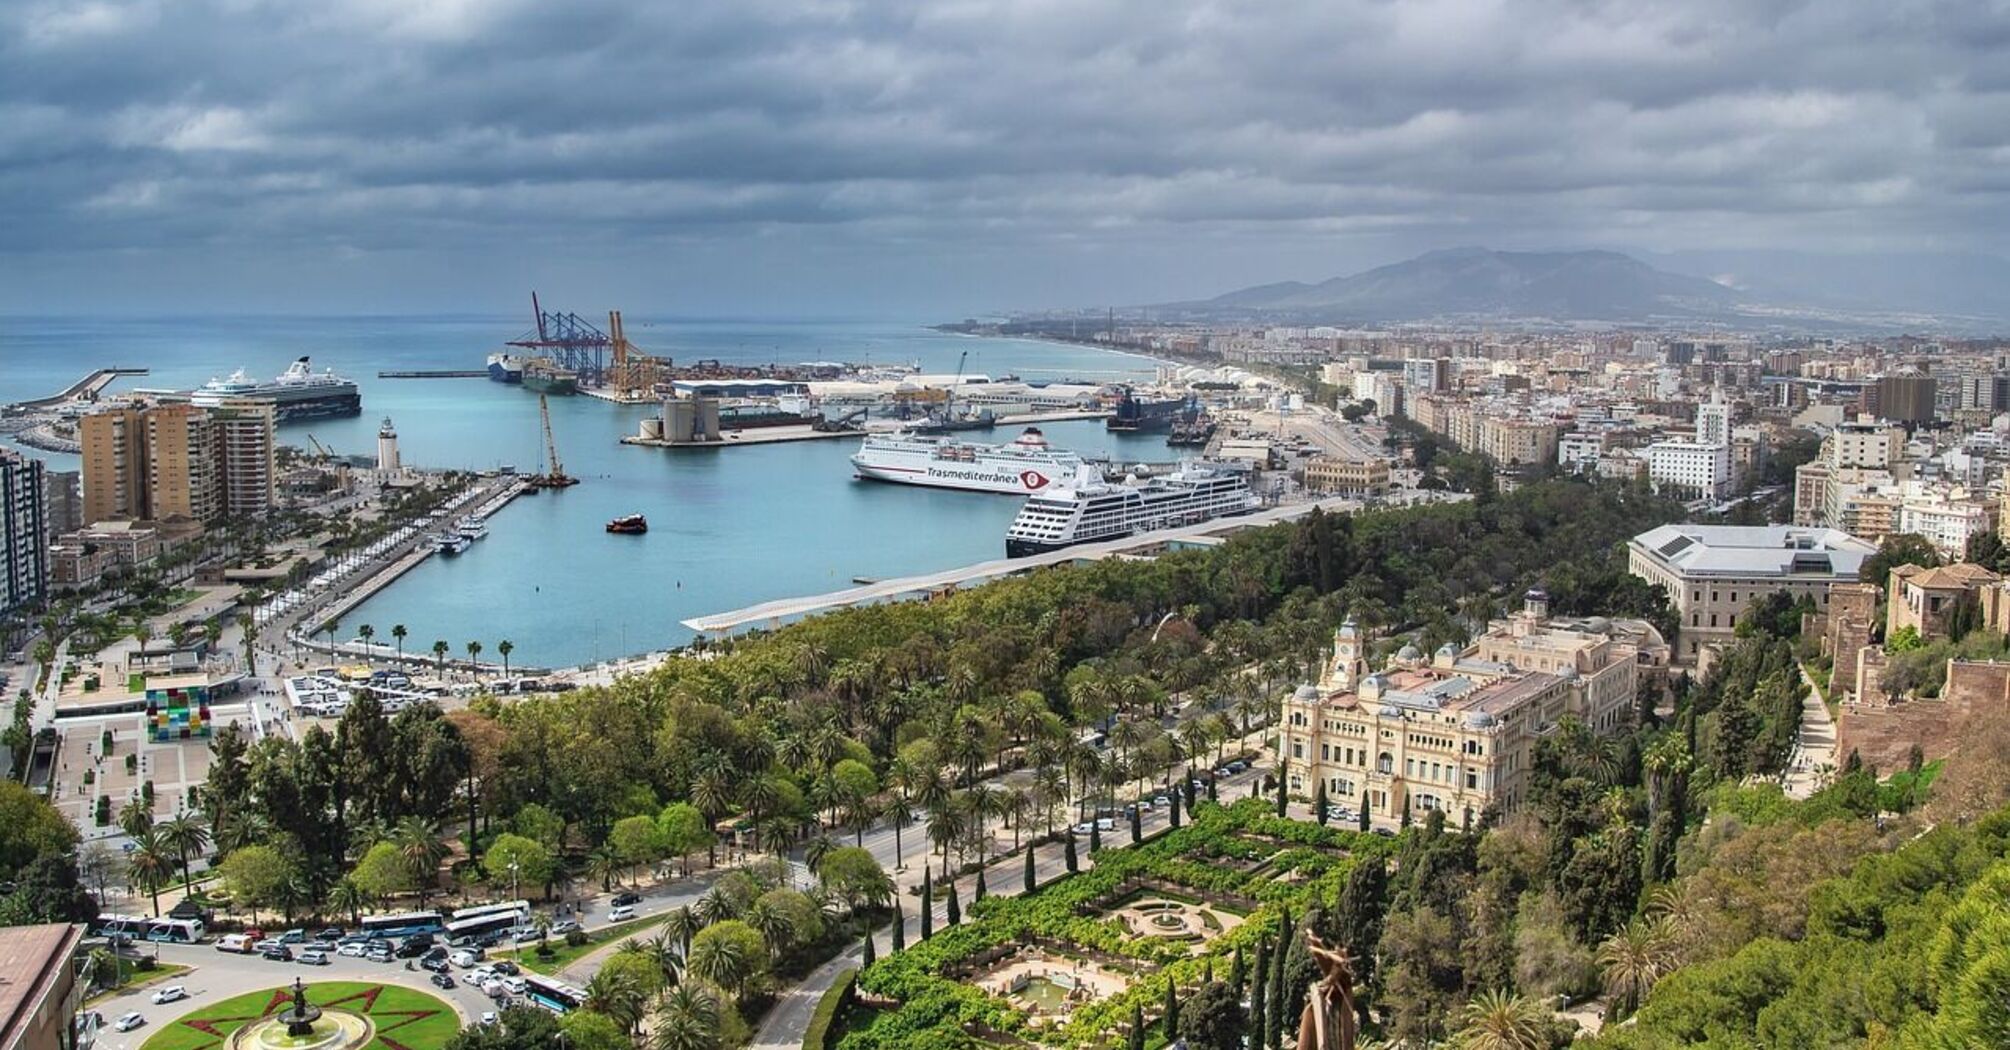 For the first time in history, Malaga recorded three million hotel stays per year